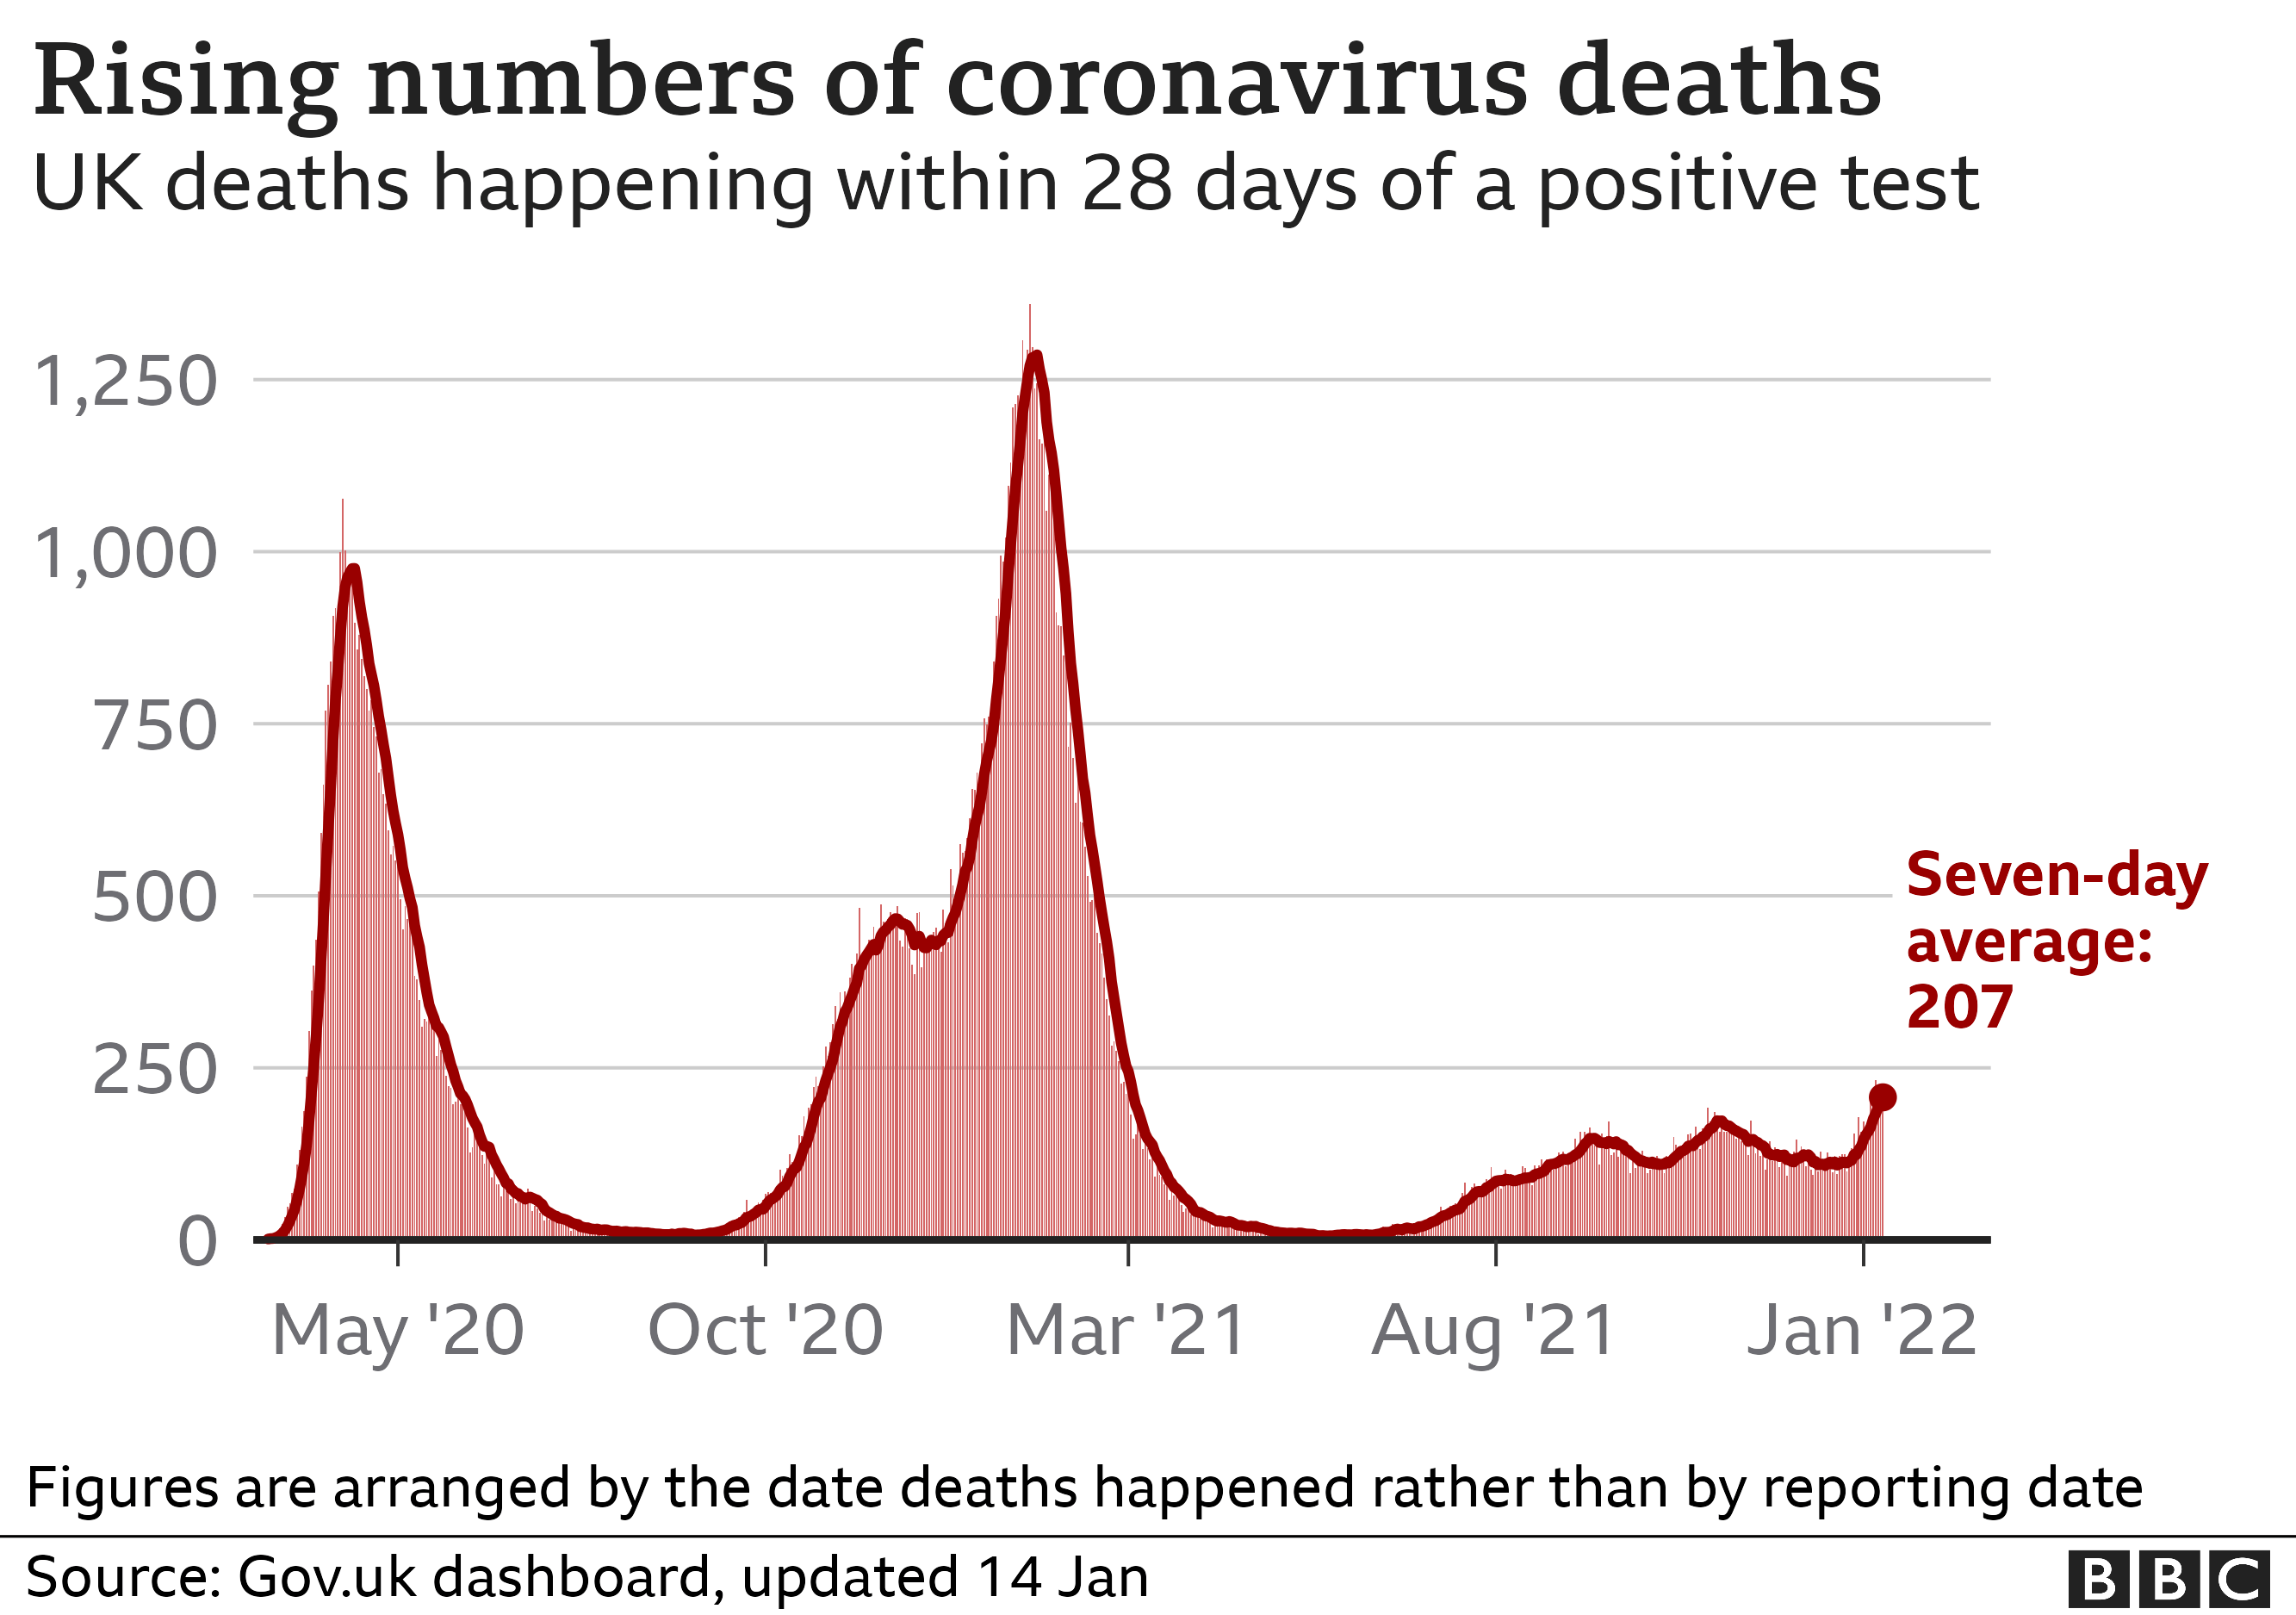 Timeseries of deaths happening each day within 28 days of a positive coronavirus test